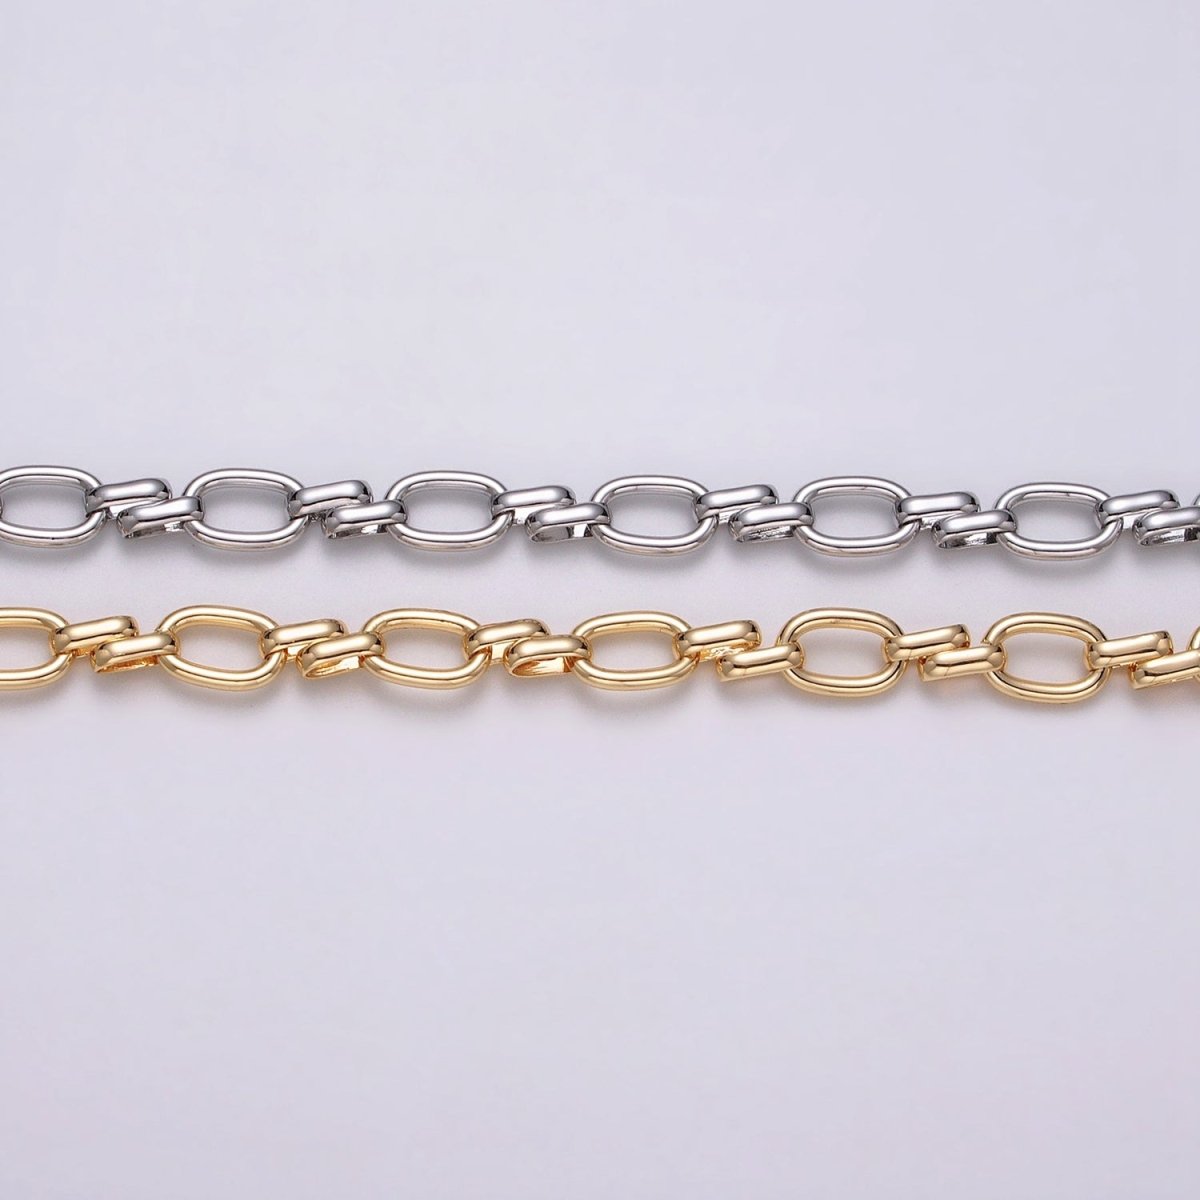 16K Gold Filled Oval Link Chain Chunky Unfinished Chain by Yard for Handmade Supply 6.1mm | ROLL-1313 ROLL-1314 Clearance Pricing - DLUXCA